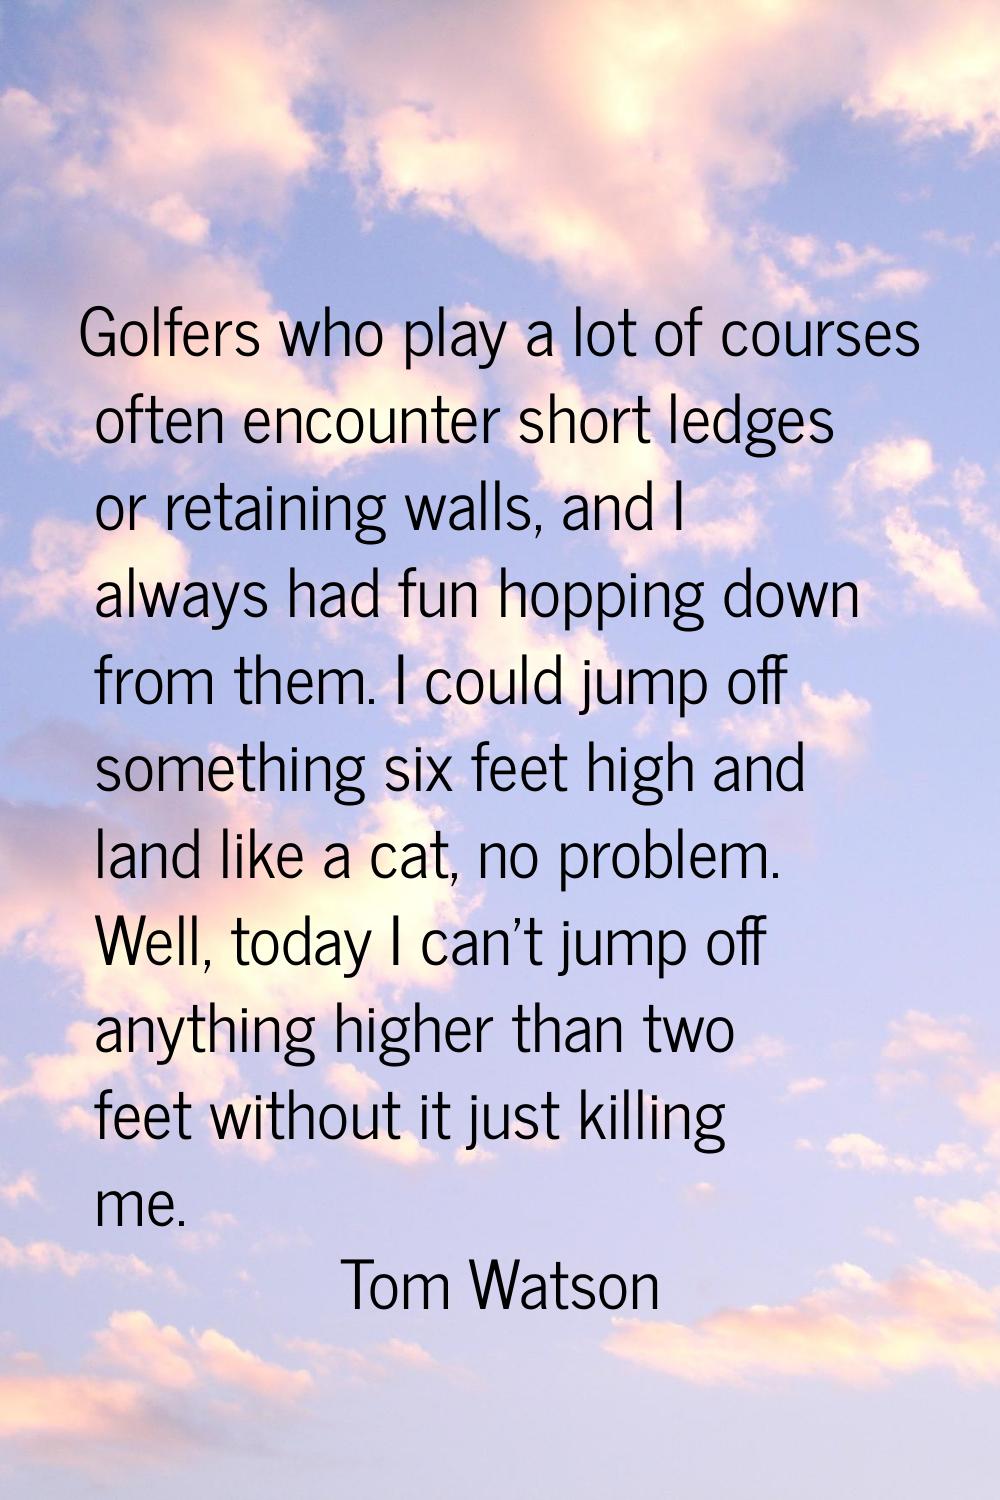 Golfers who play a lot of courses often encounter short ledges or retaining walls, and I always had